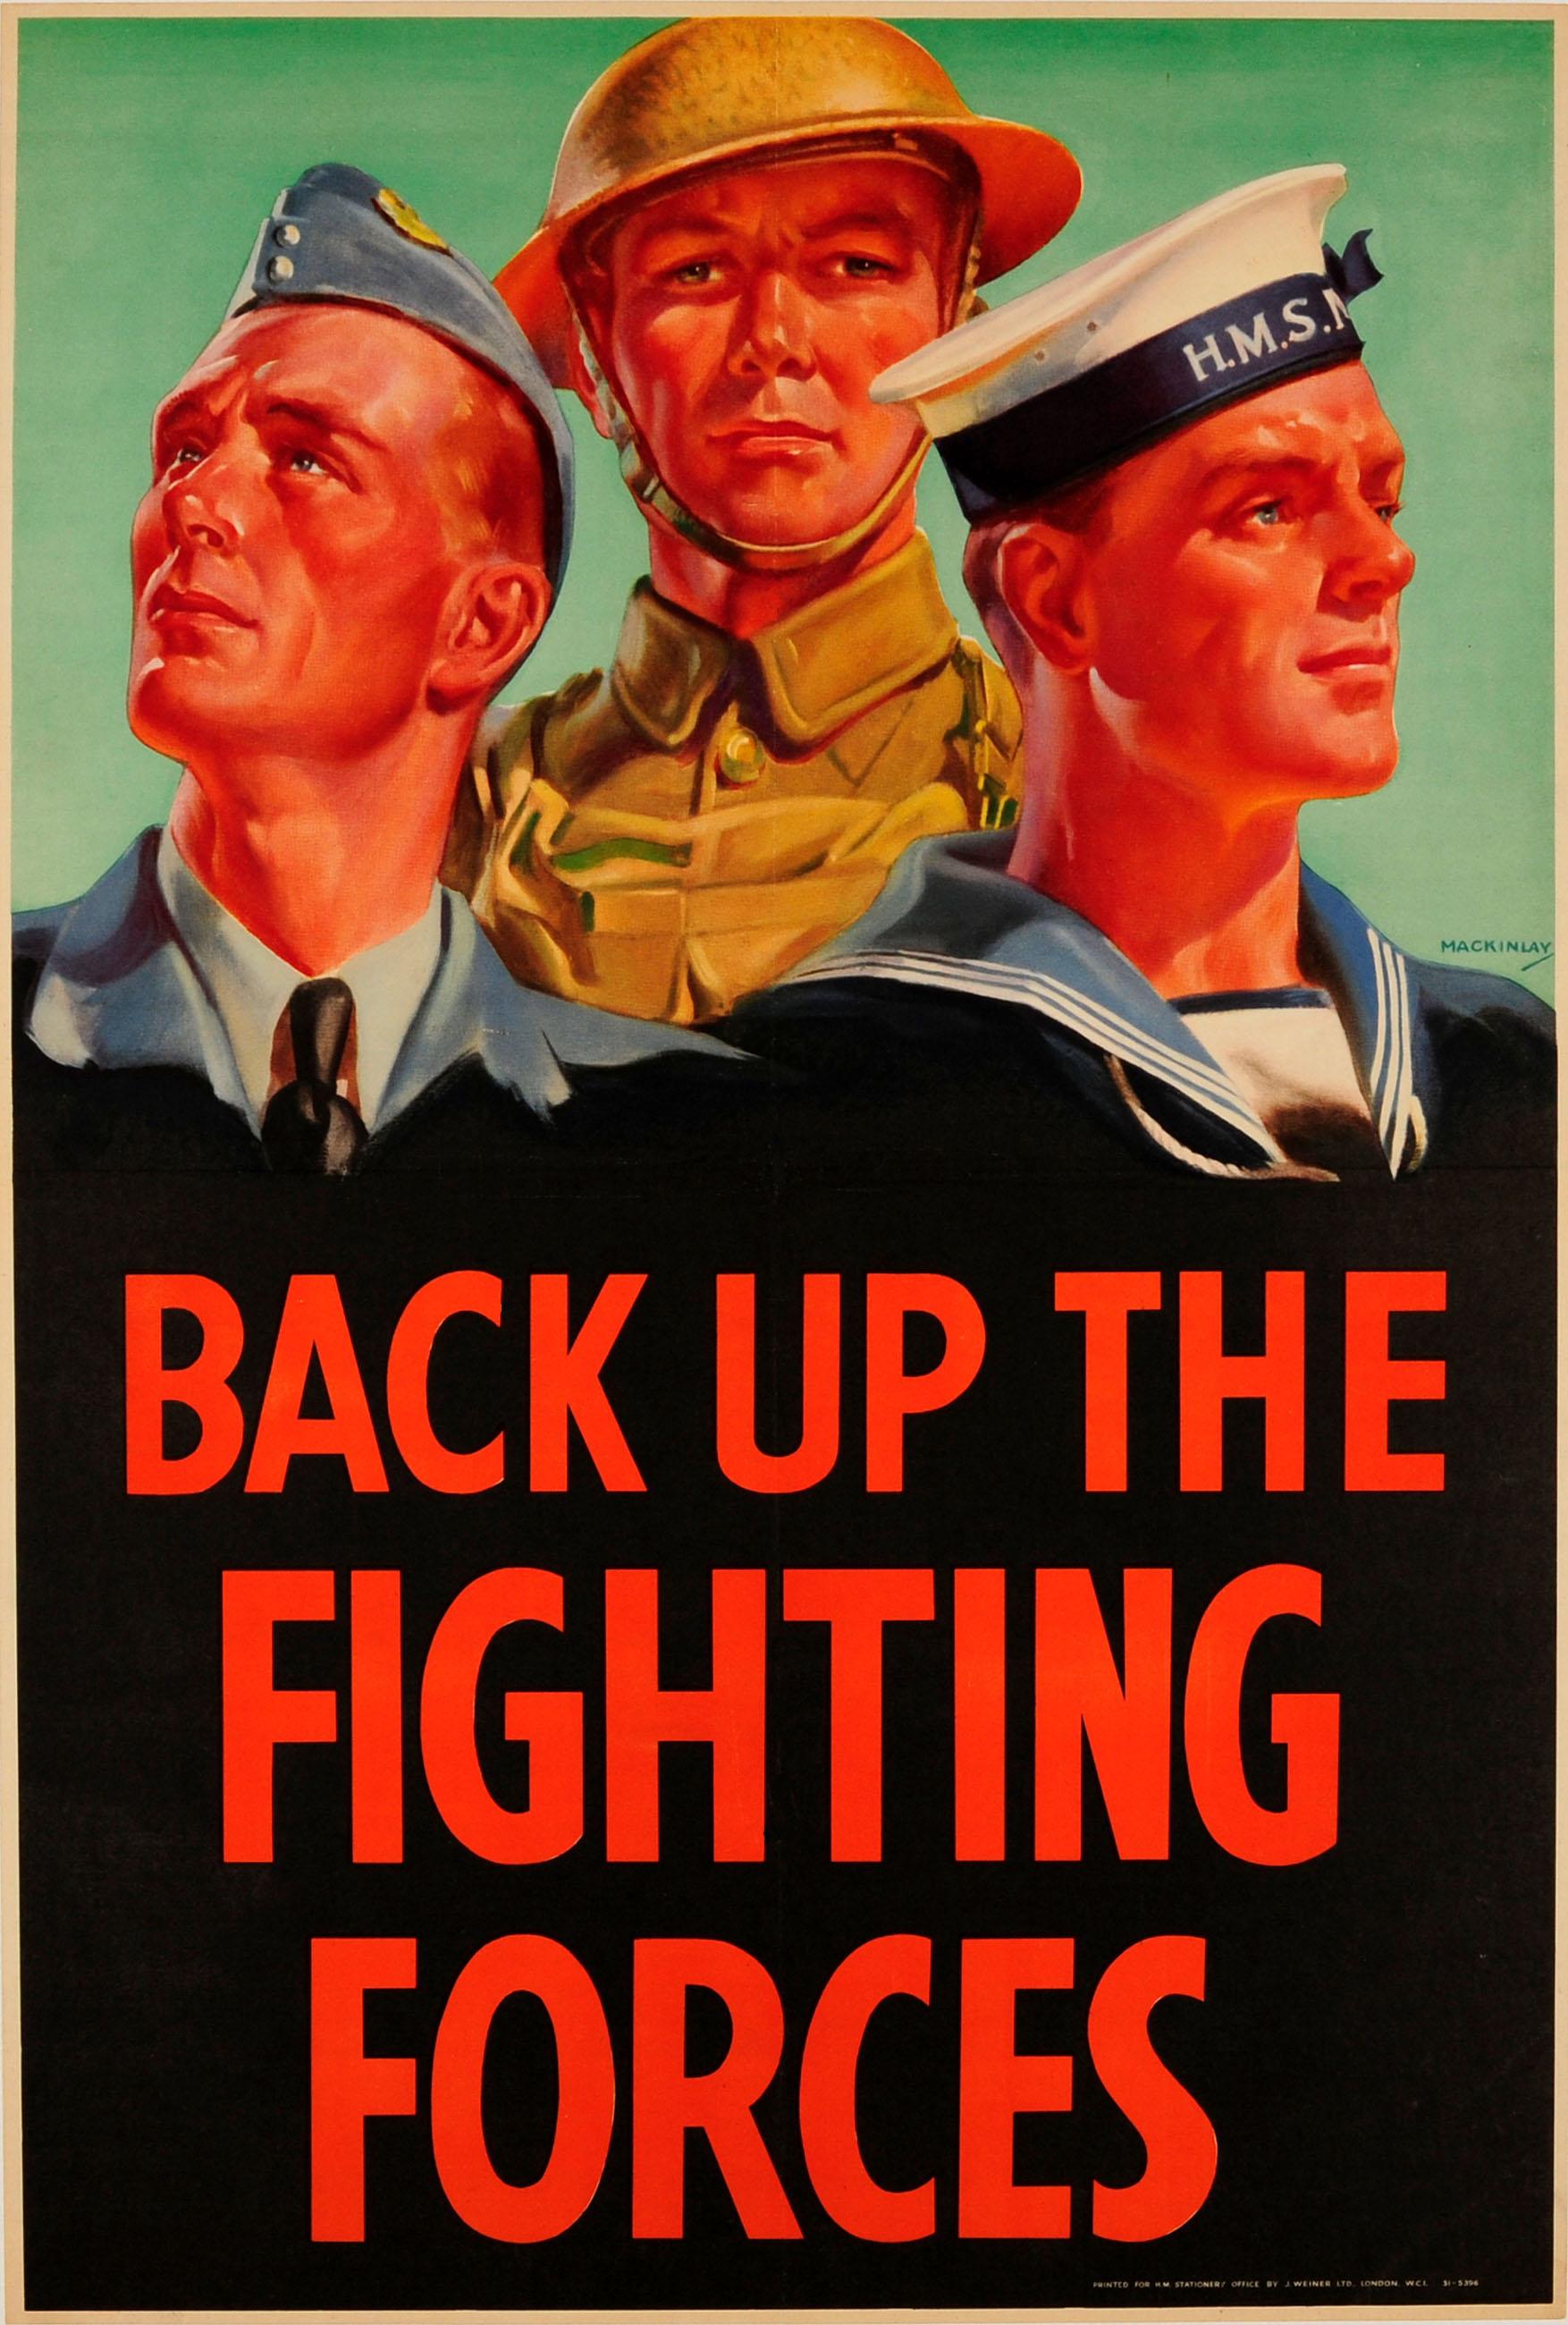 Mackinlay Print - Original Vintage WWII Poster Back Up The Fighting Forces British Army RAF Navy